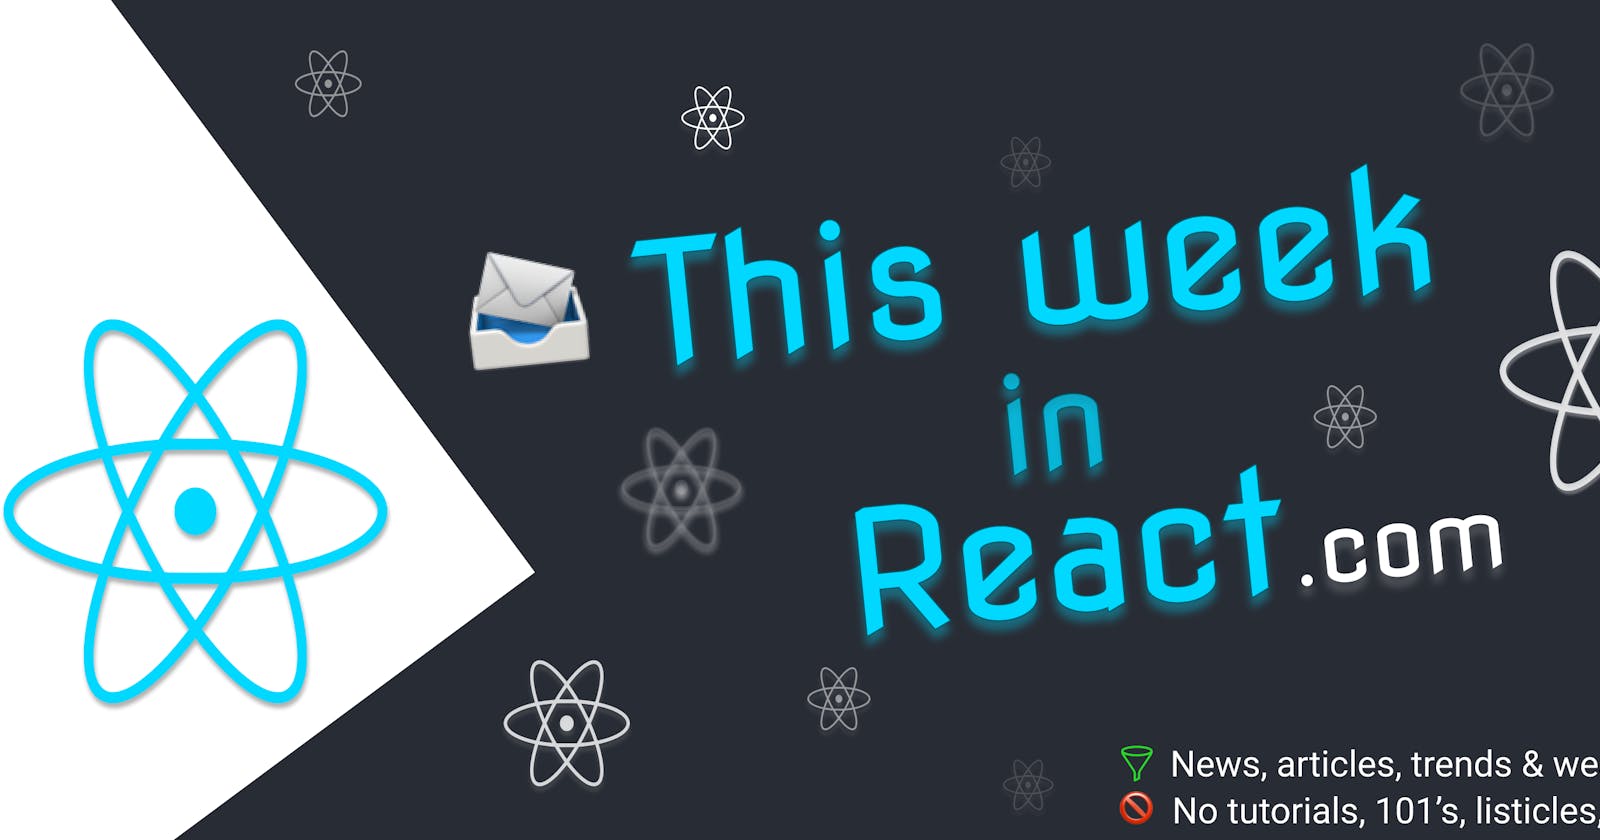 This Week In React #159: Bun, Static Hermes, Next.js, Redwood, Marz, React Aria Components, Next Nav, visionOS, Reanimated, Flame, Skia Fonts, Stagger